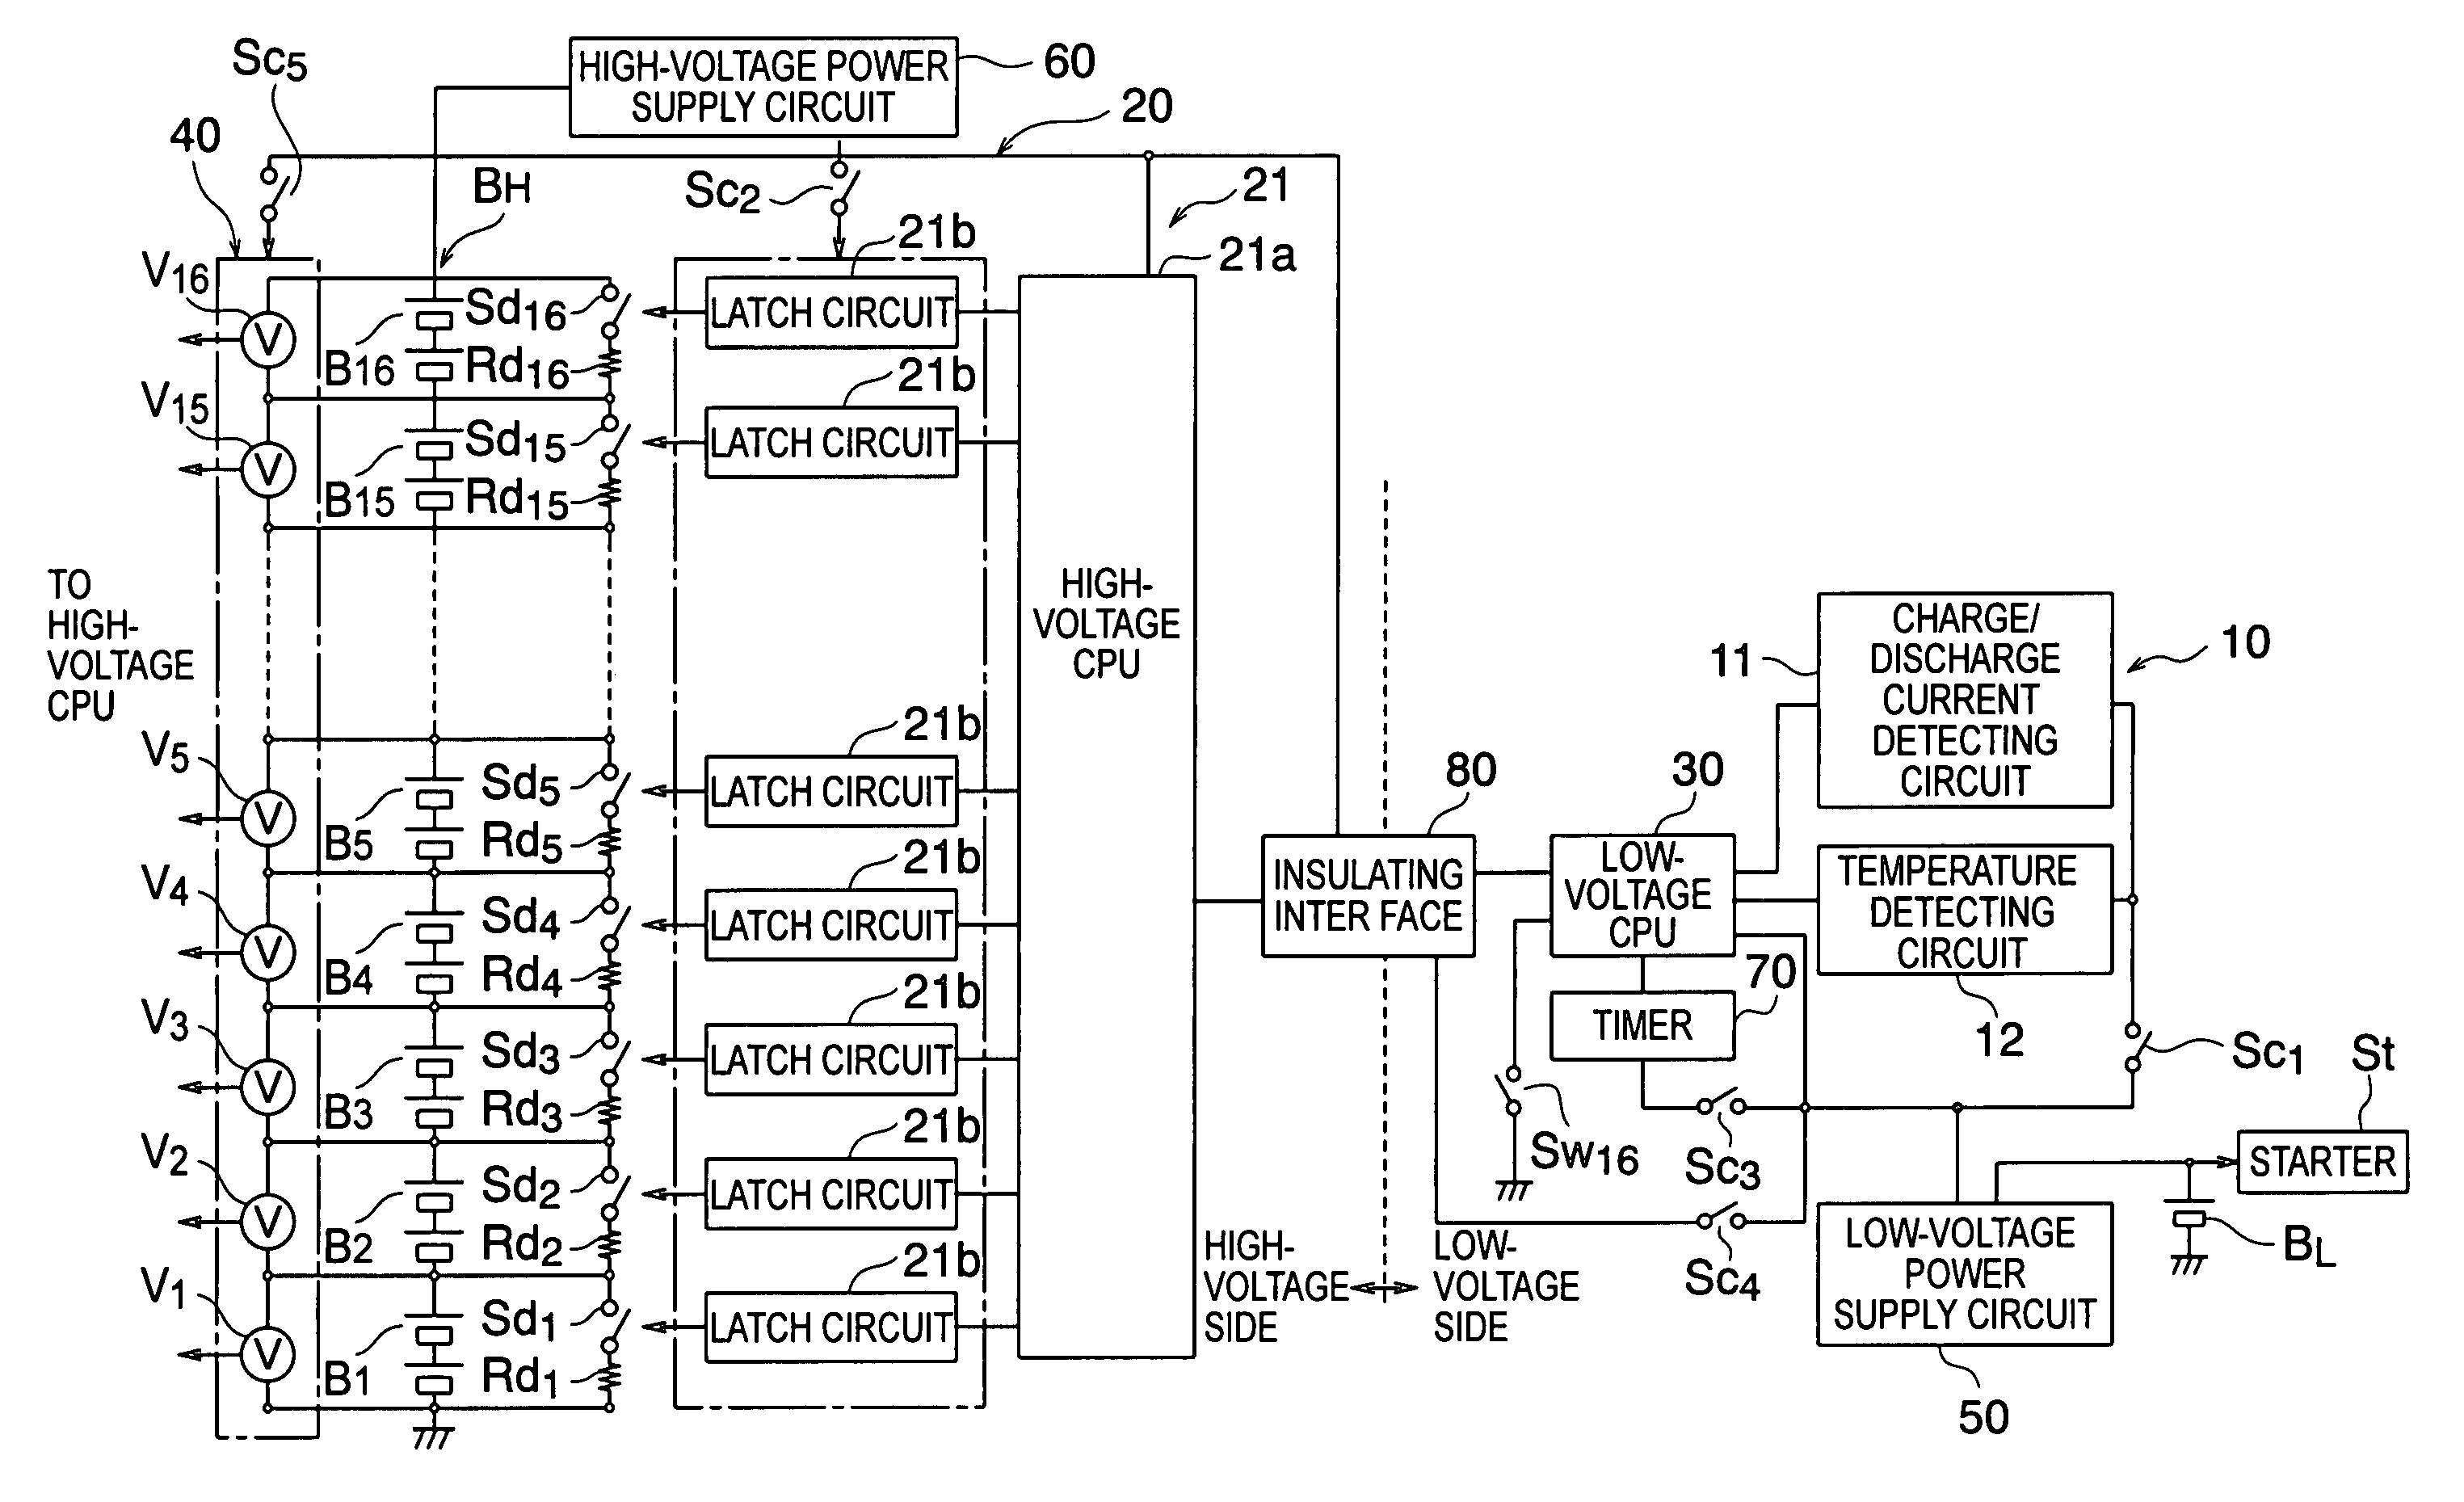 Battery control device for equalization of cell voltages